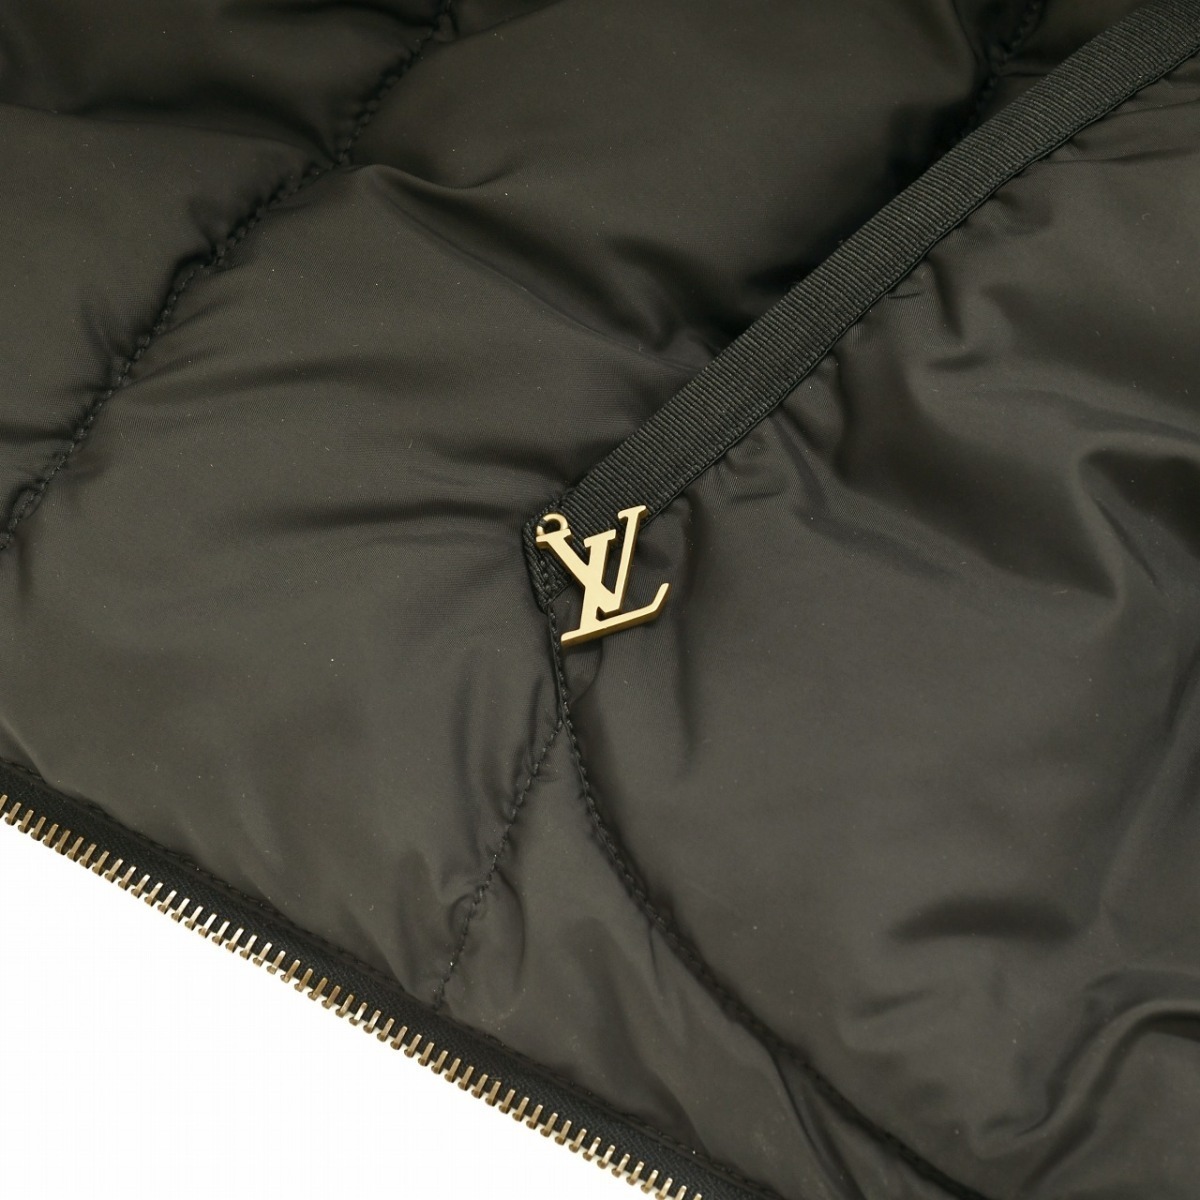 827 LOUIS VUITTON Louis Vuitton with a hood .2Way Zip up down jacket 34 number outer fastener sleeve removed type free shipping 